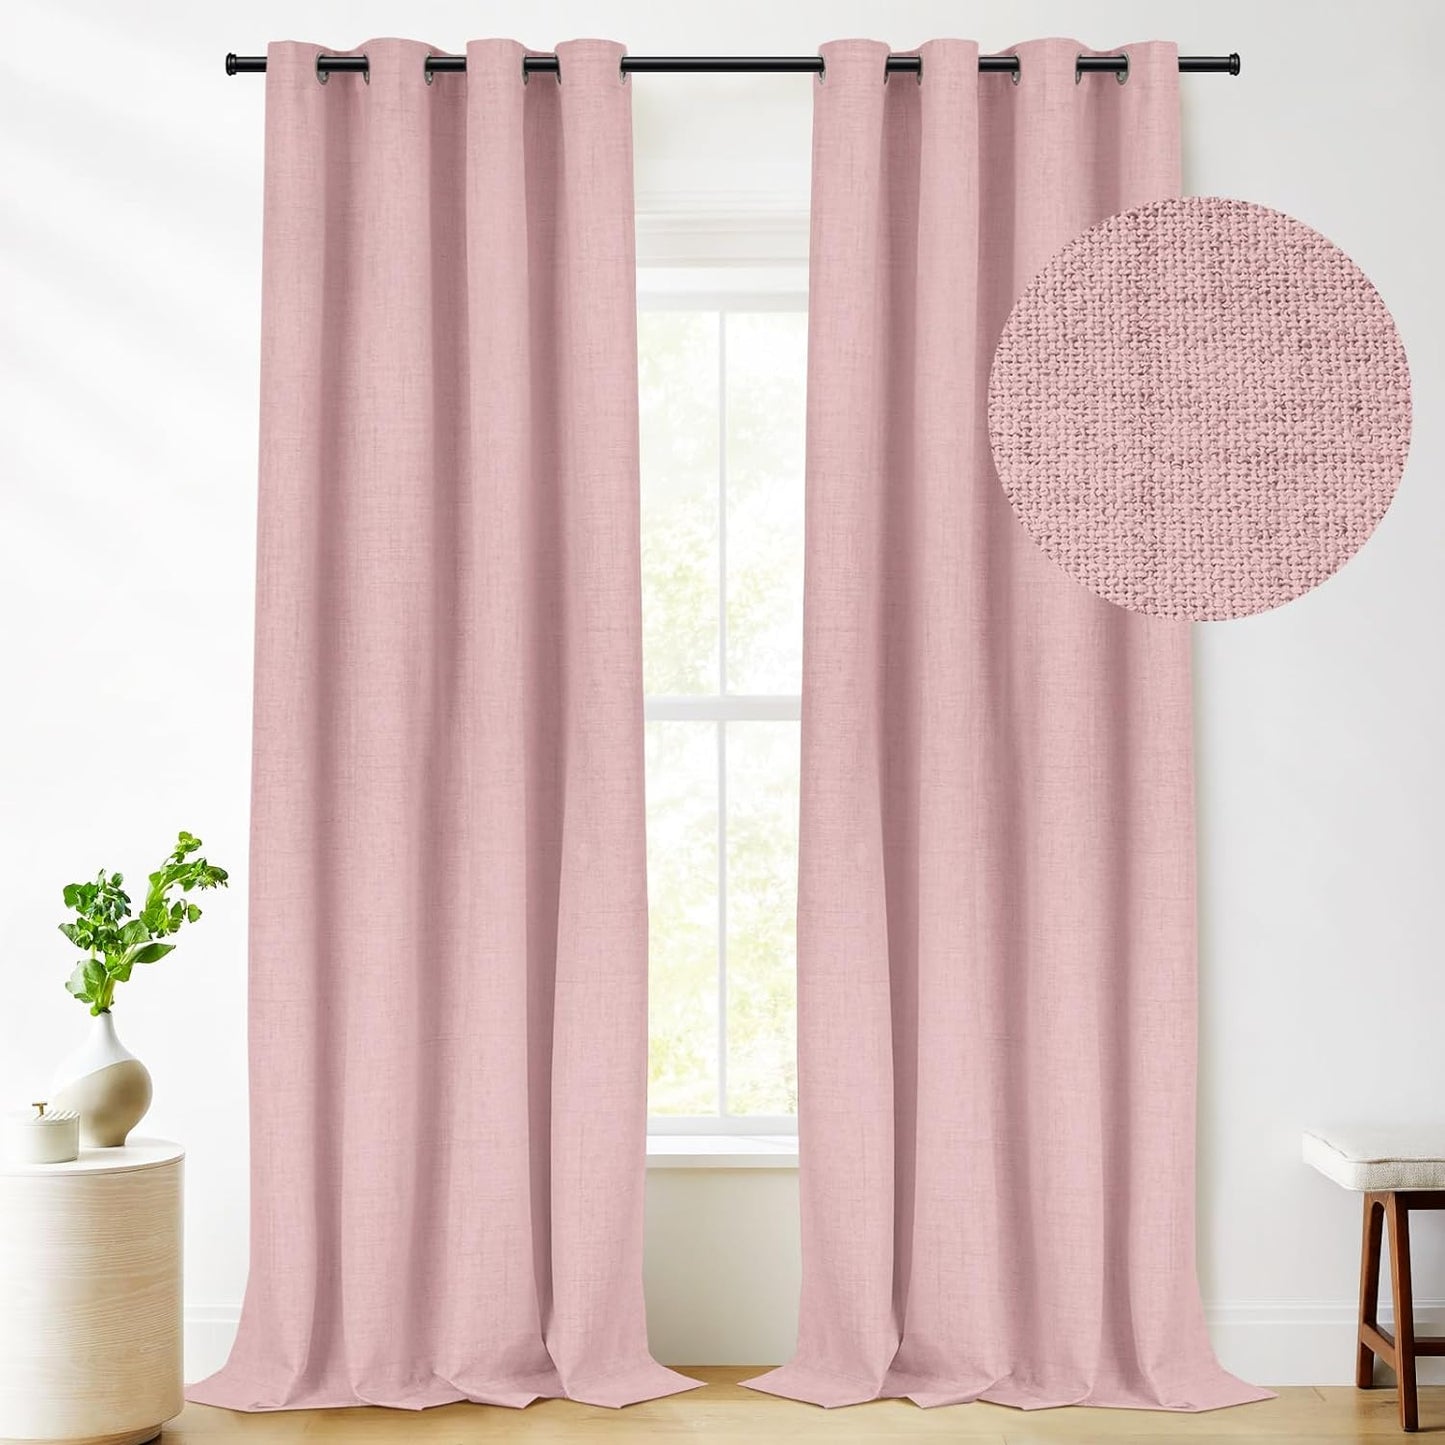 RHF Blackout Curtains 84 Inch Length 2 Panels Set, Primitive Linen Look, 100% Blackout Curtains Linen Black Out Curtains for Bedroom Windows, Burlap Grommet Curtains-(50X84, Oatmeal)  Rose Home Fashion Pink W50 X L96 